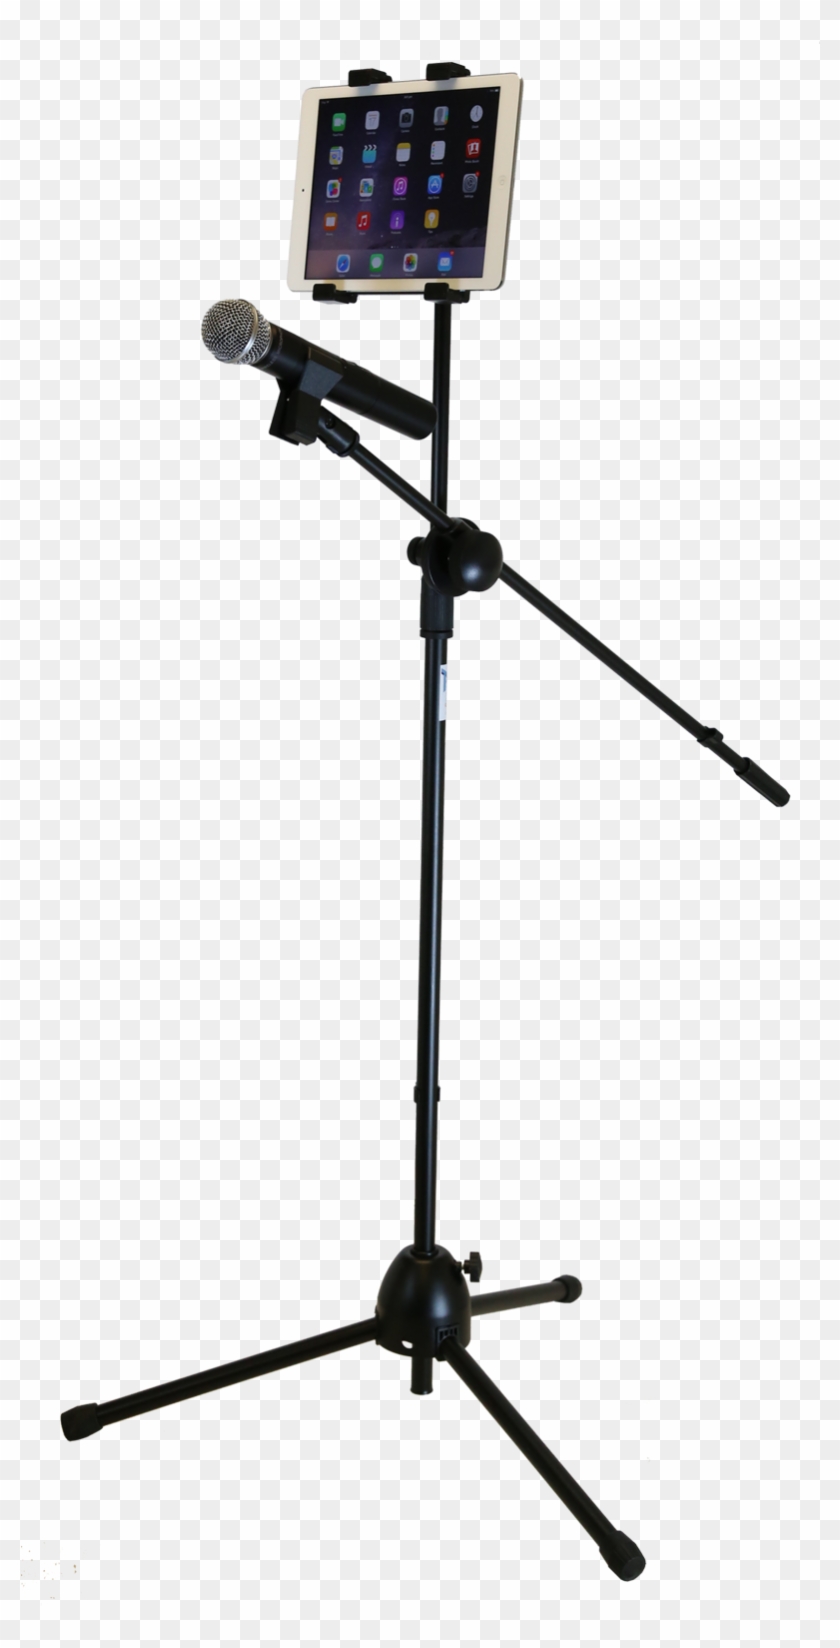 Solo Clipart Microphone Stands Loudspeaker - Display Device #1383420